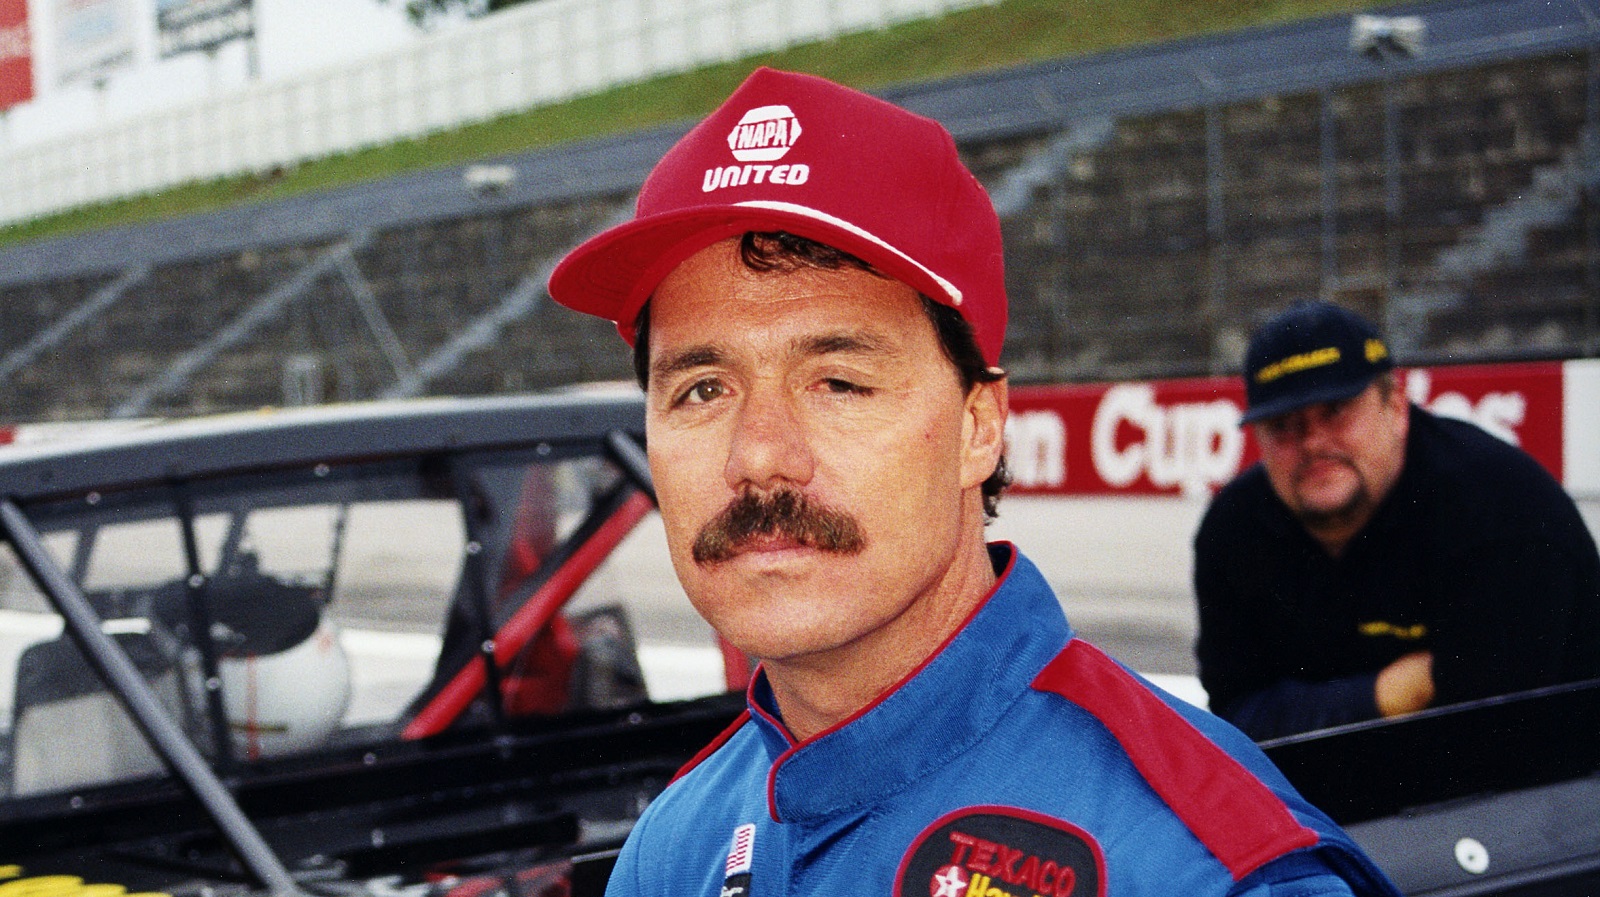 Ernie Irvan made his comeback from injuries suffered the year before in a NASCAR Cup practice crash by entering three races on the new NASCAR Truck Series circuit in 1995 in his own NAPA-sponsored Ford F-150.